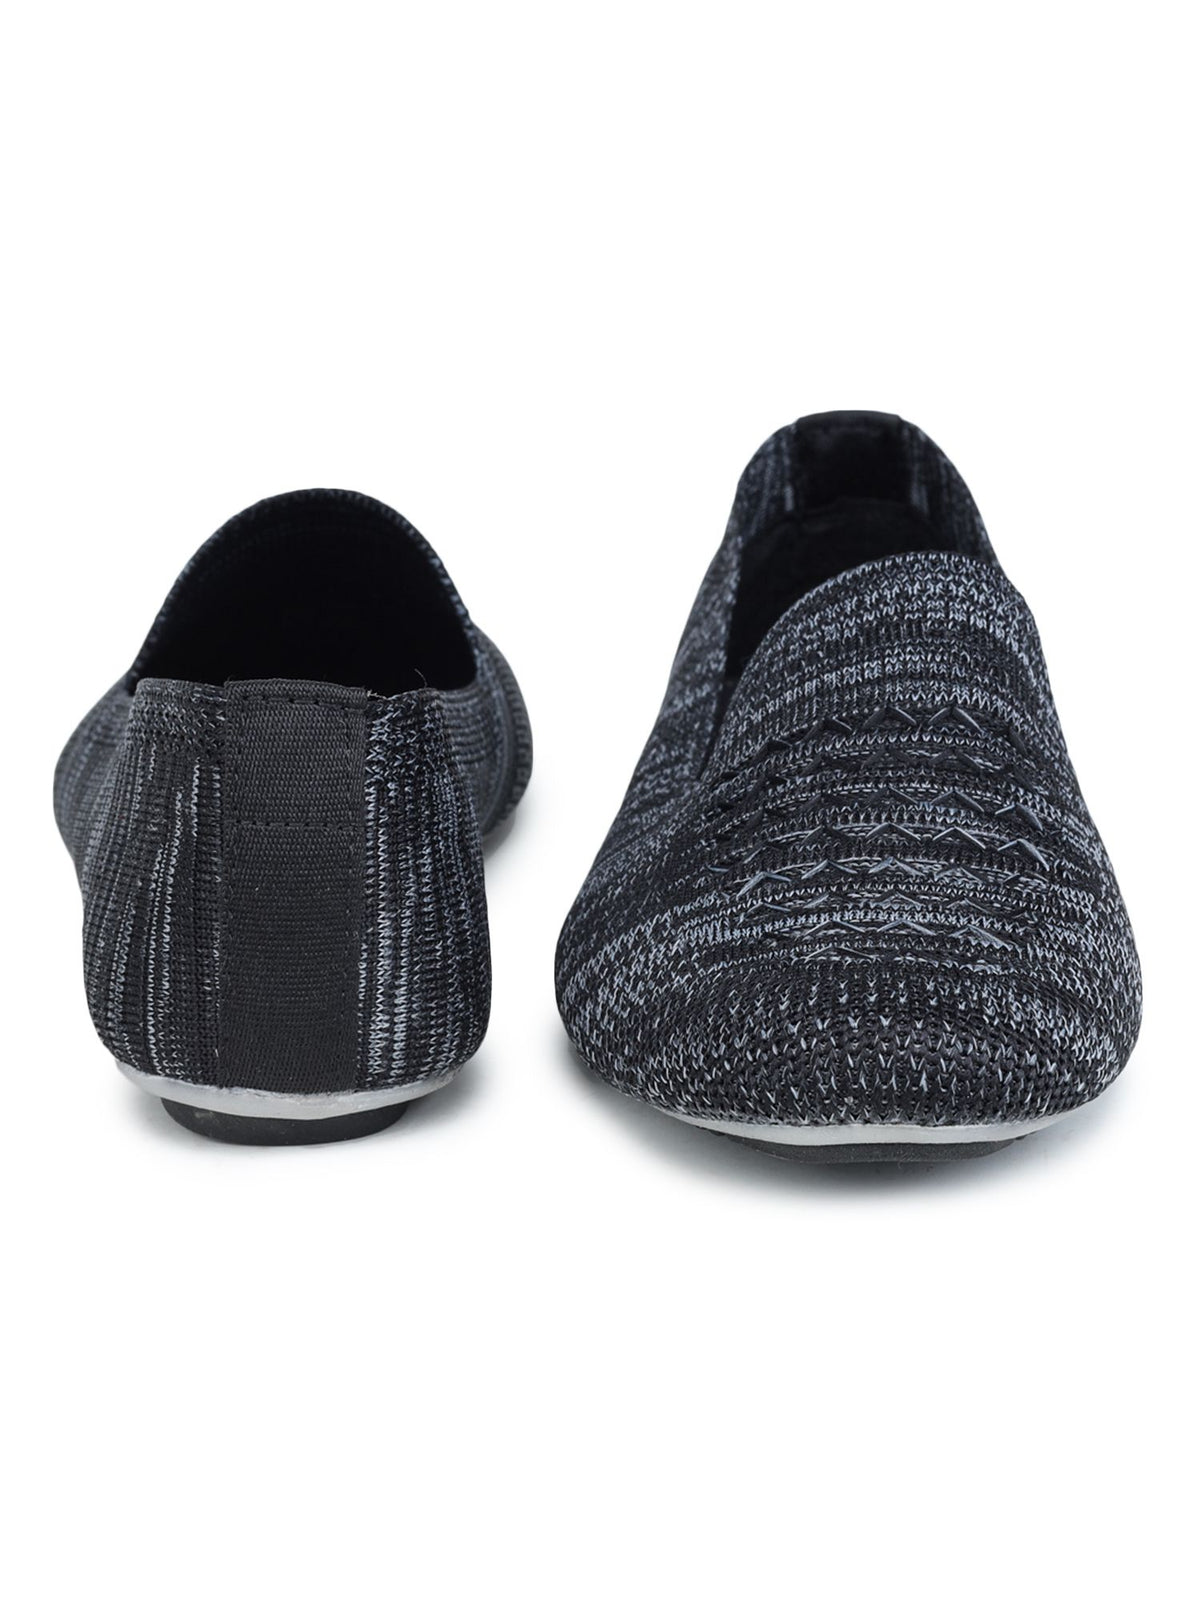 Black Solid Textile Slip On Casual Bellies for Women